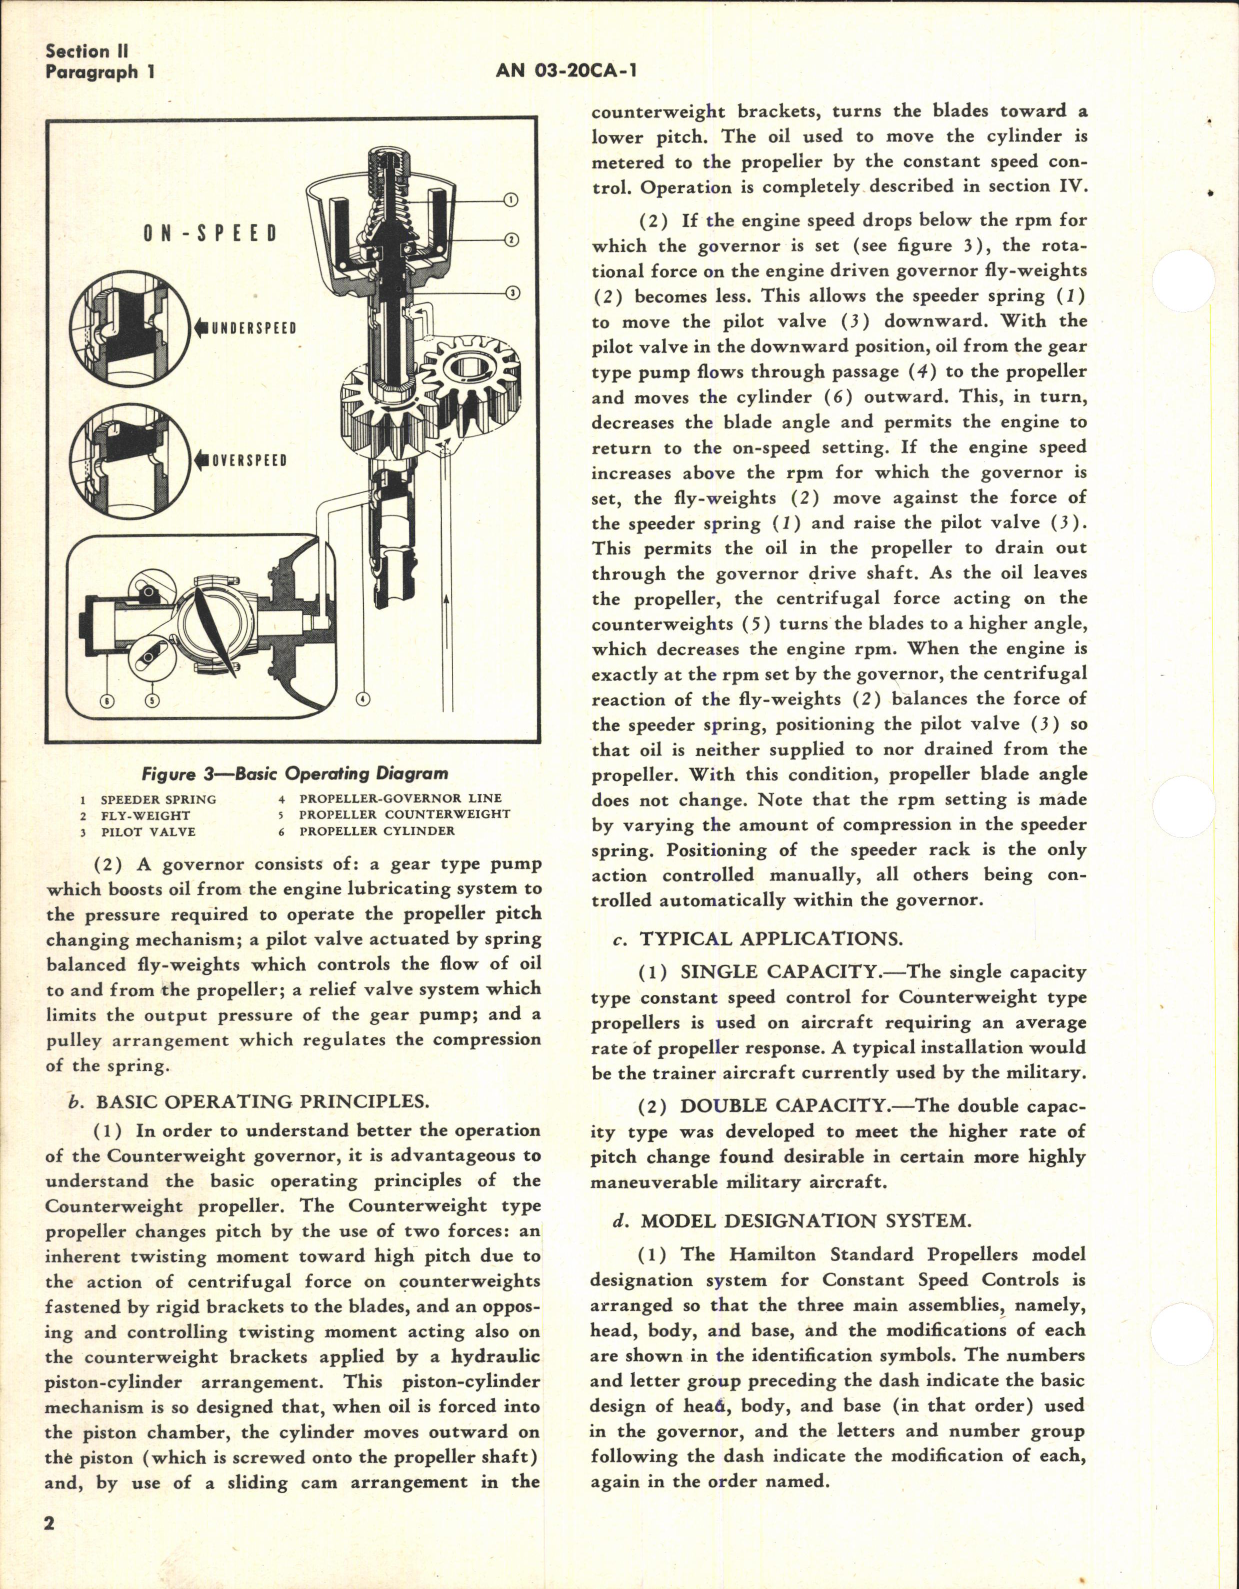 Sample page 6 from AirCorps Library document: Handbook of Instructions with Parts Catalog for Constant Speed Propeller Governors and Controls for Counterweight Propellers